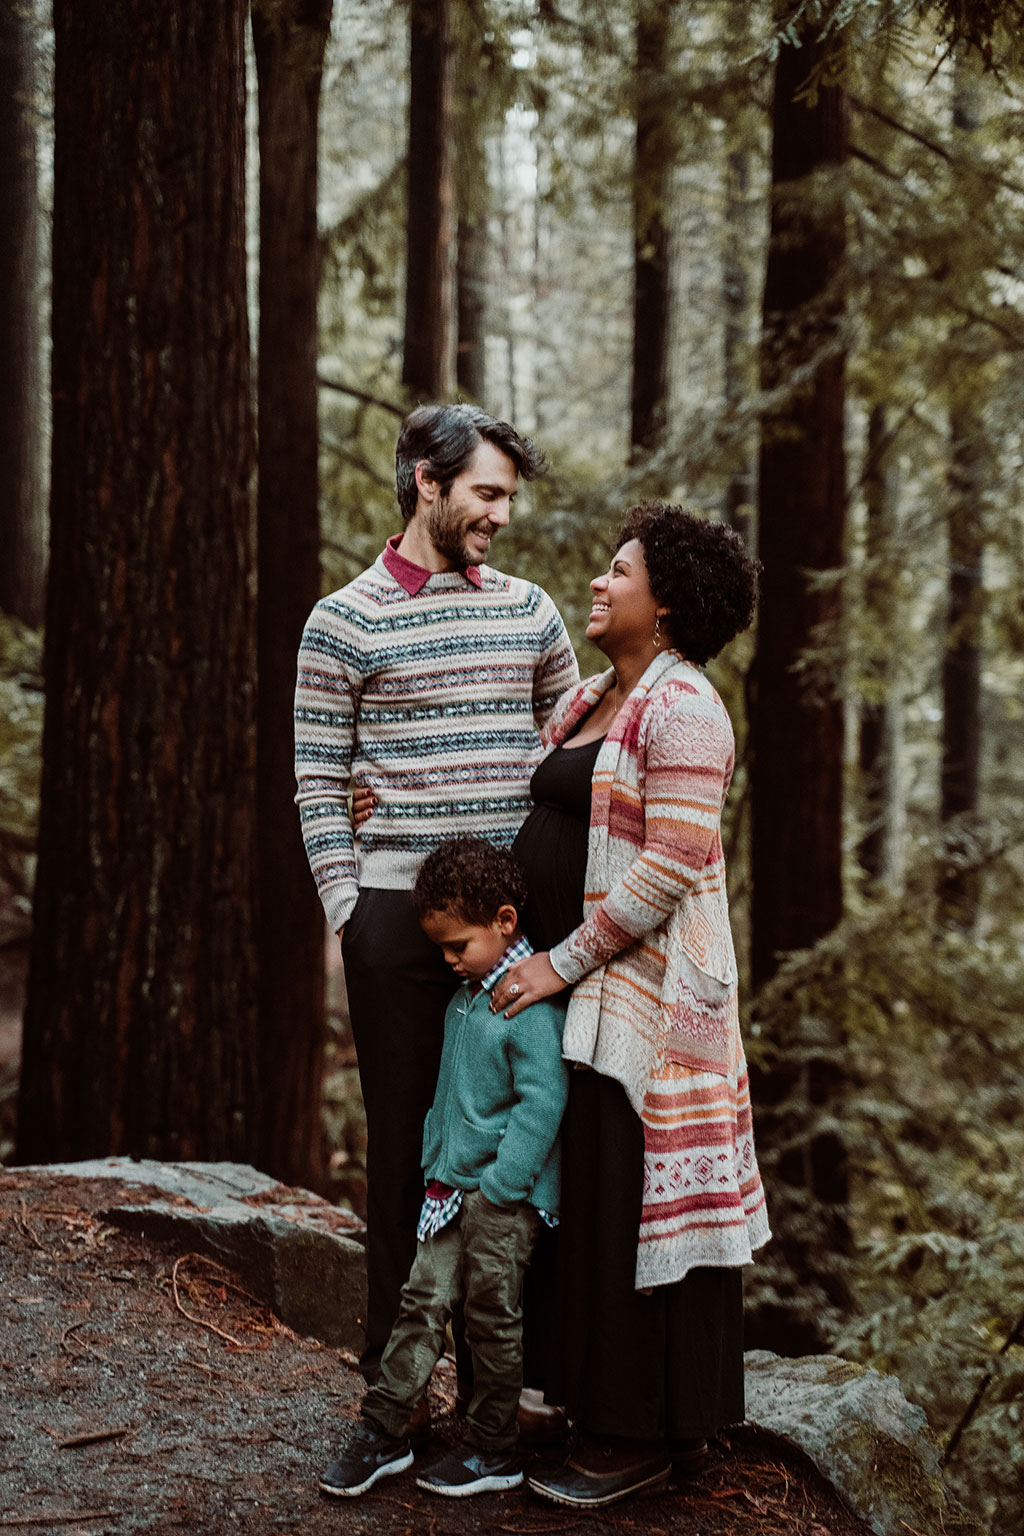 Family Photography by Natalie Broders at Washington Park in Portland, OR - December